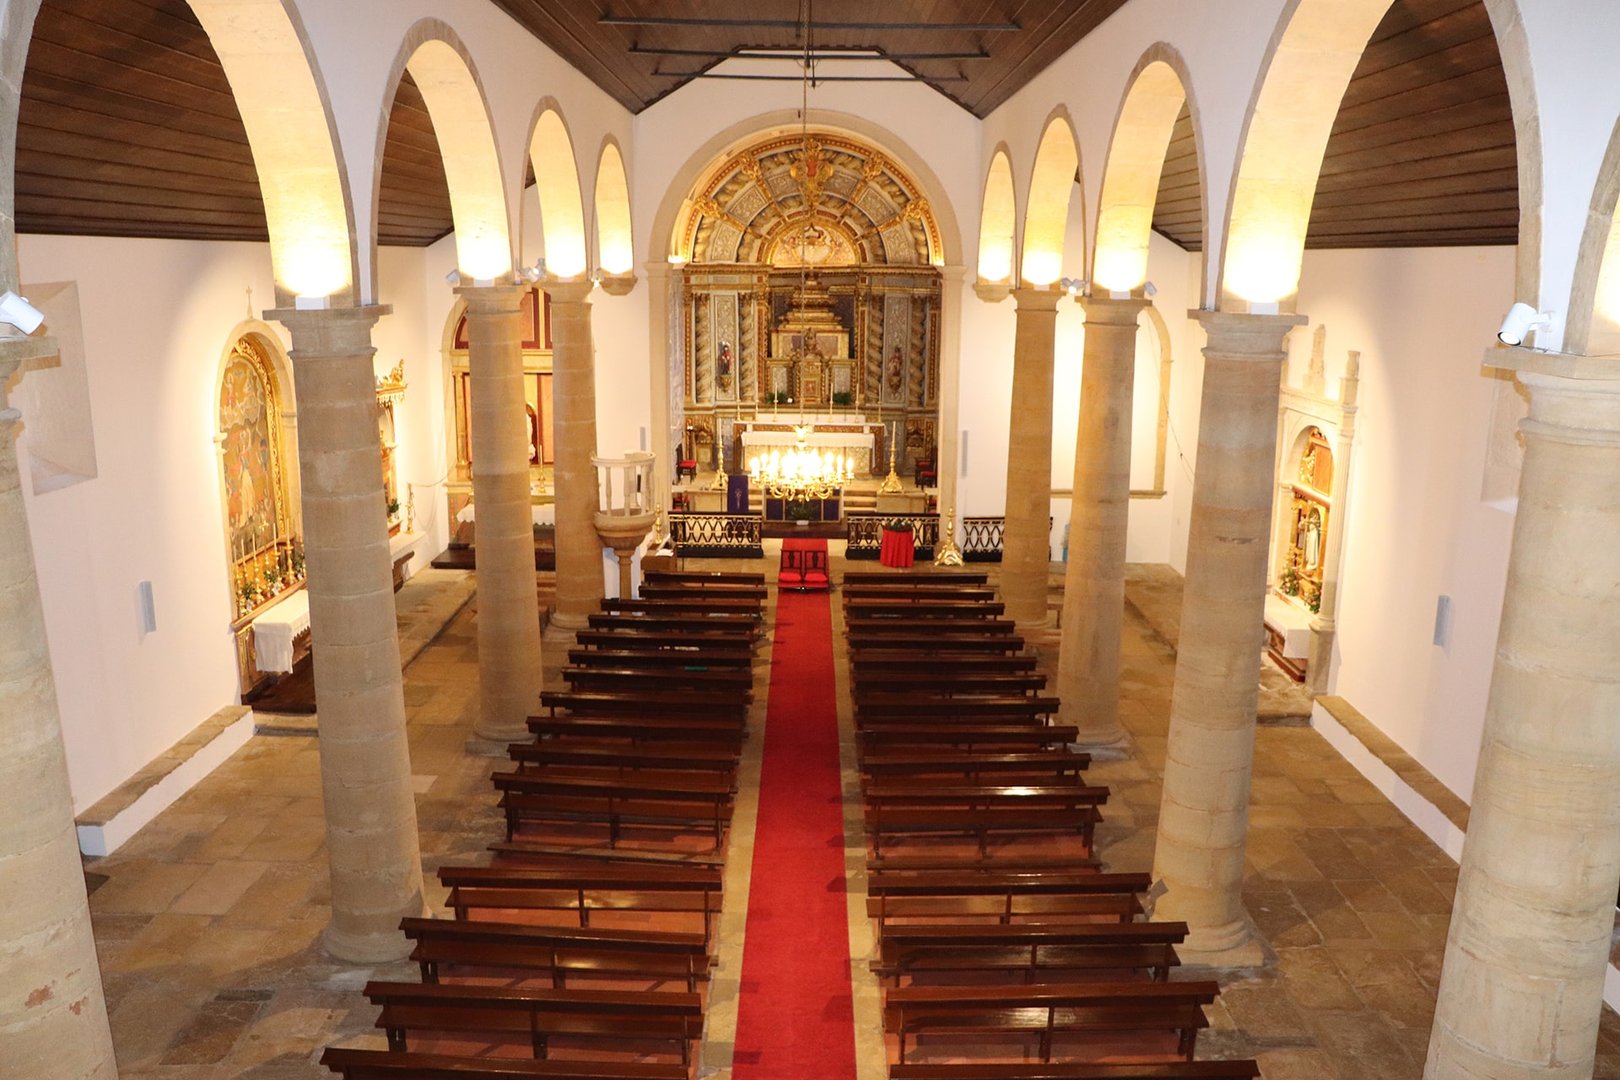 View from the High Choir to the interior of the church